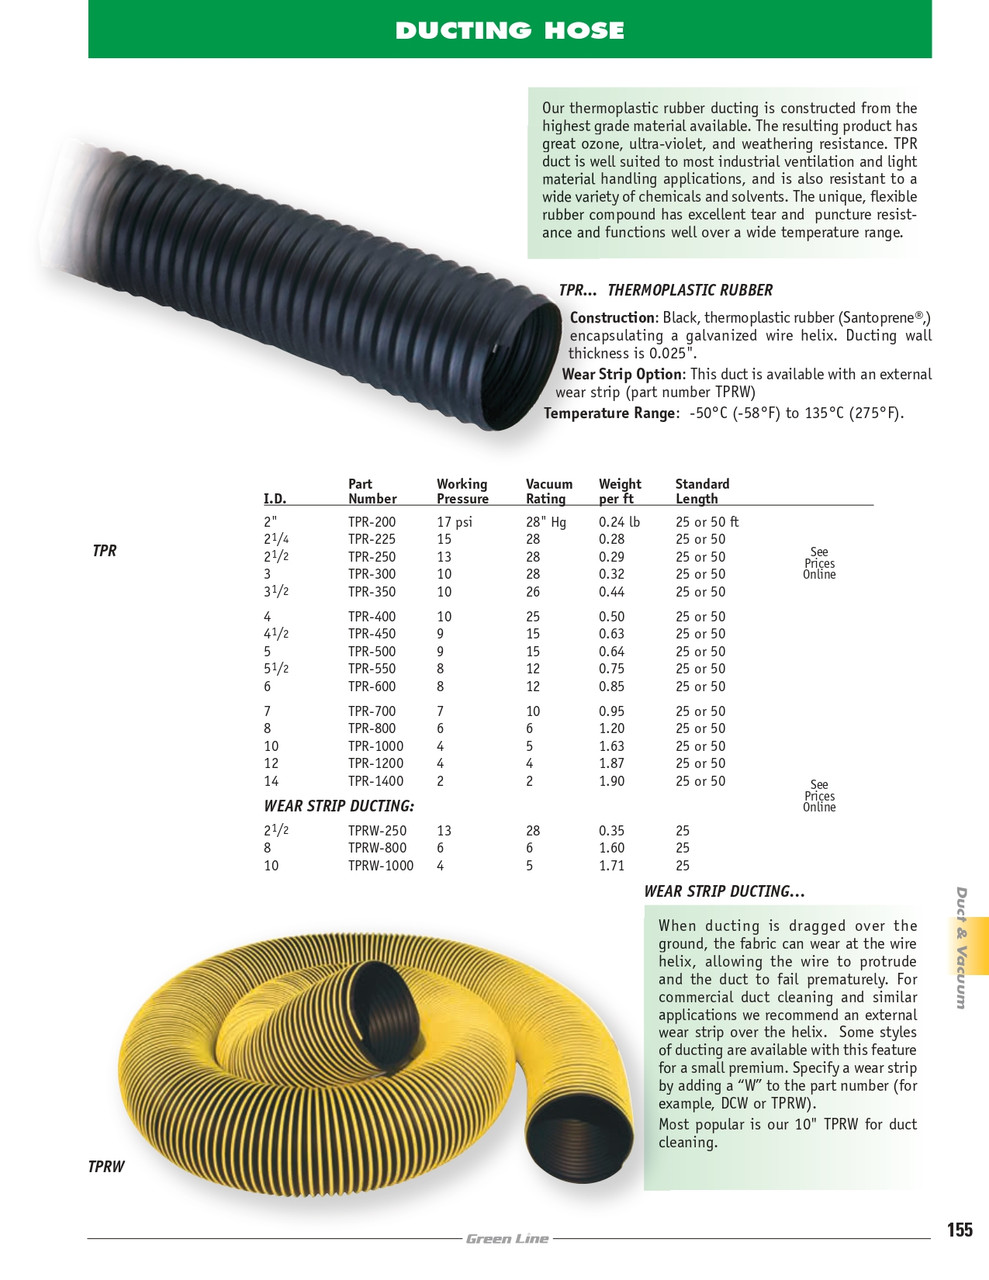 3-1/2" Thermoplastic Rubber Ducting Hose   TPR-350